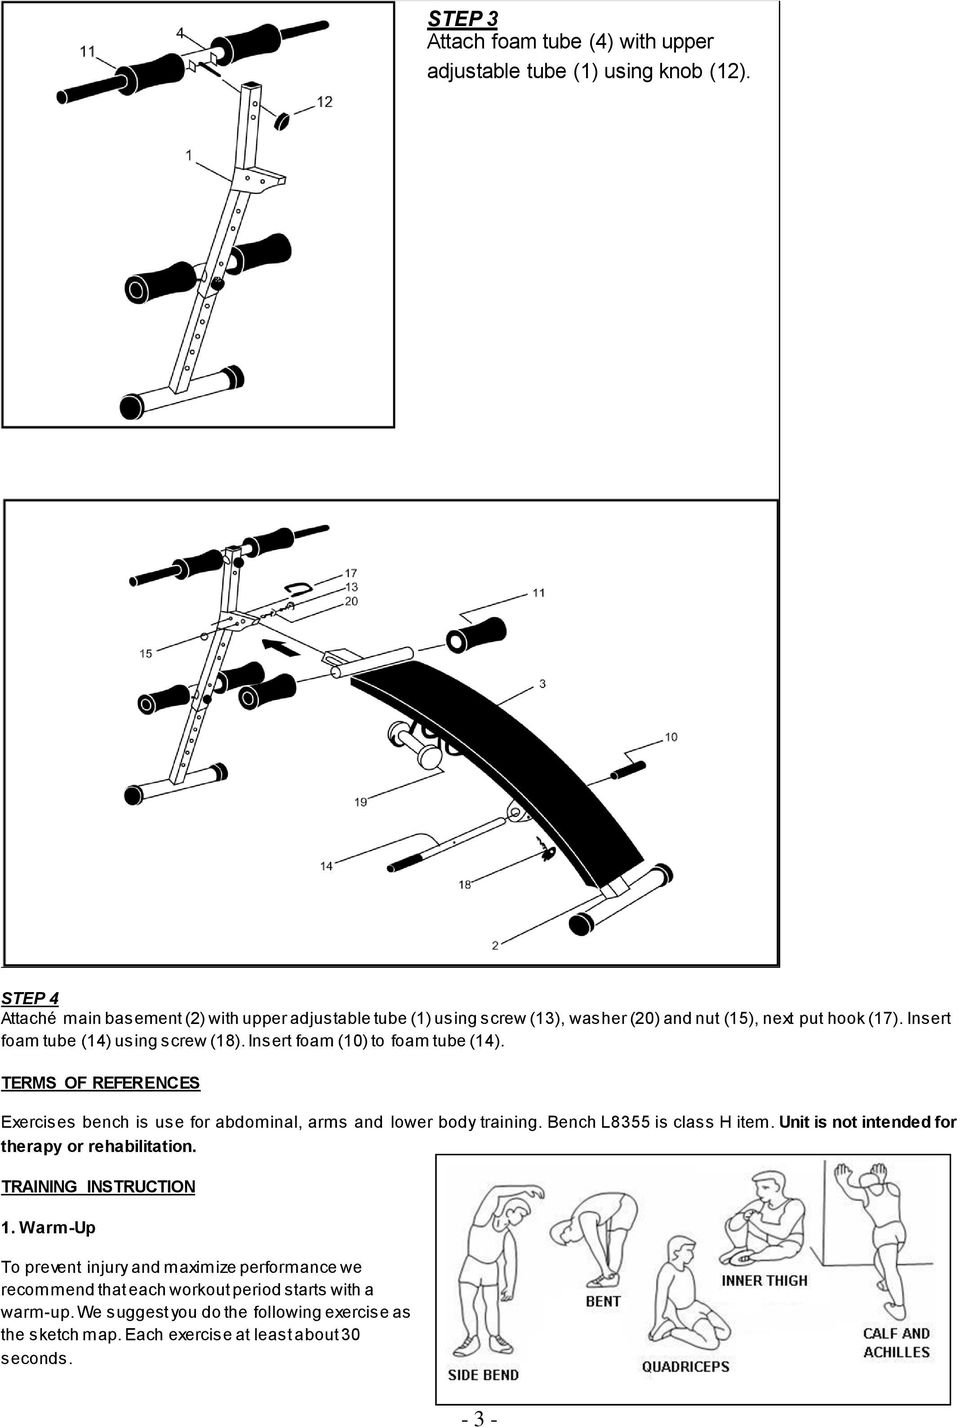 Insert foam (0) to foam tube (4). TERMS OF REFERENCES Exercises bench is use for abdominal, arms and lower body training. Bench L8355 is class H item.